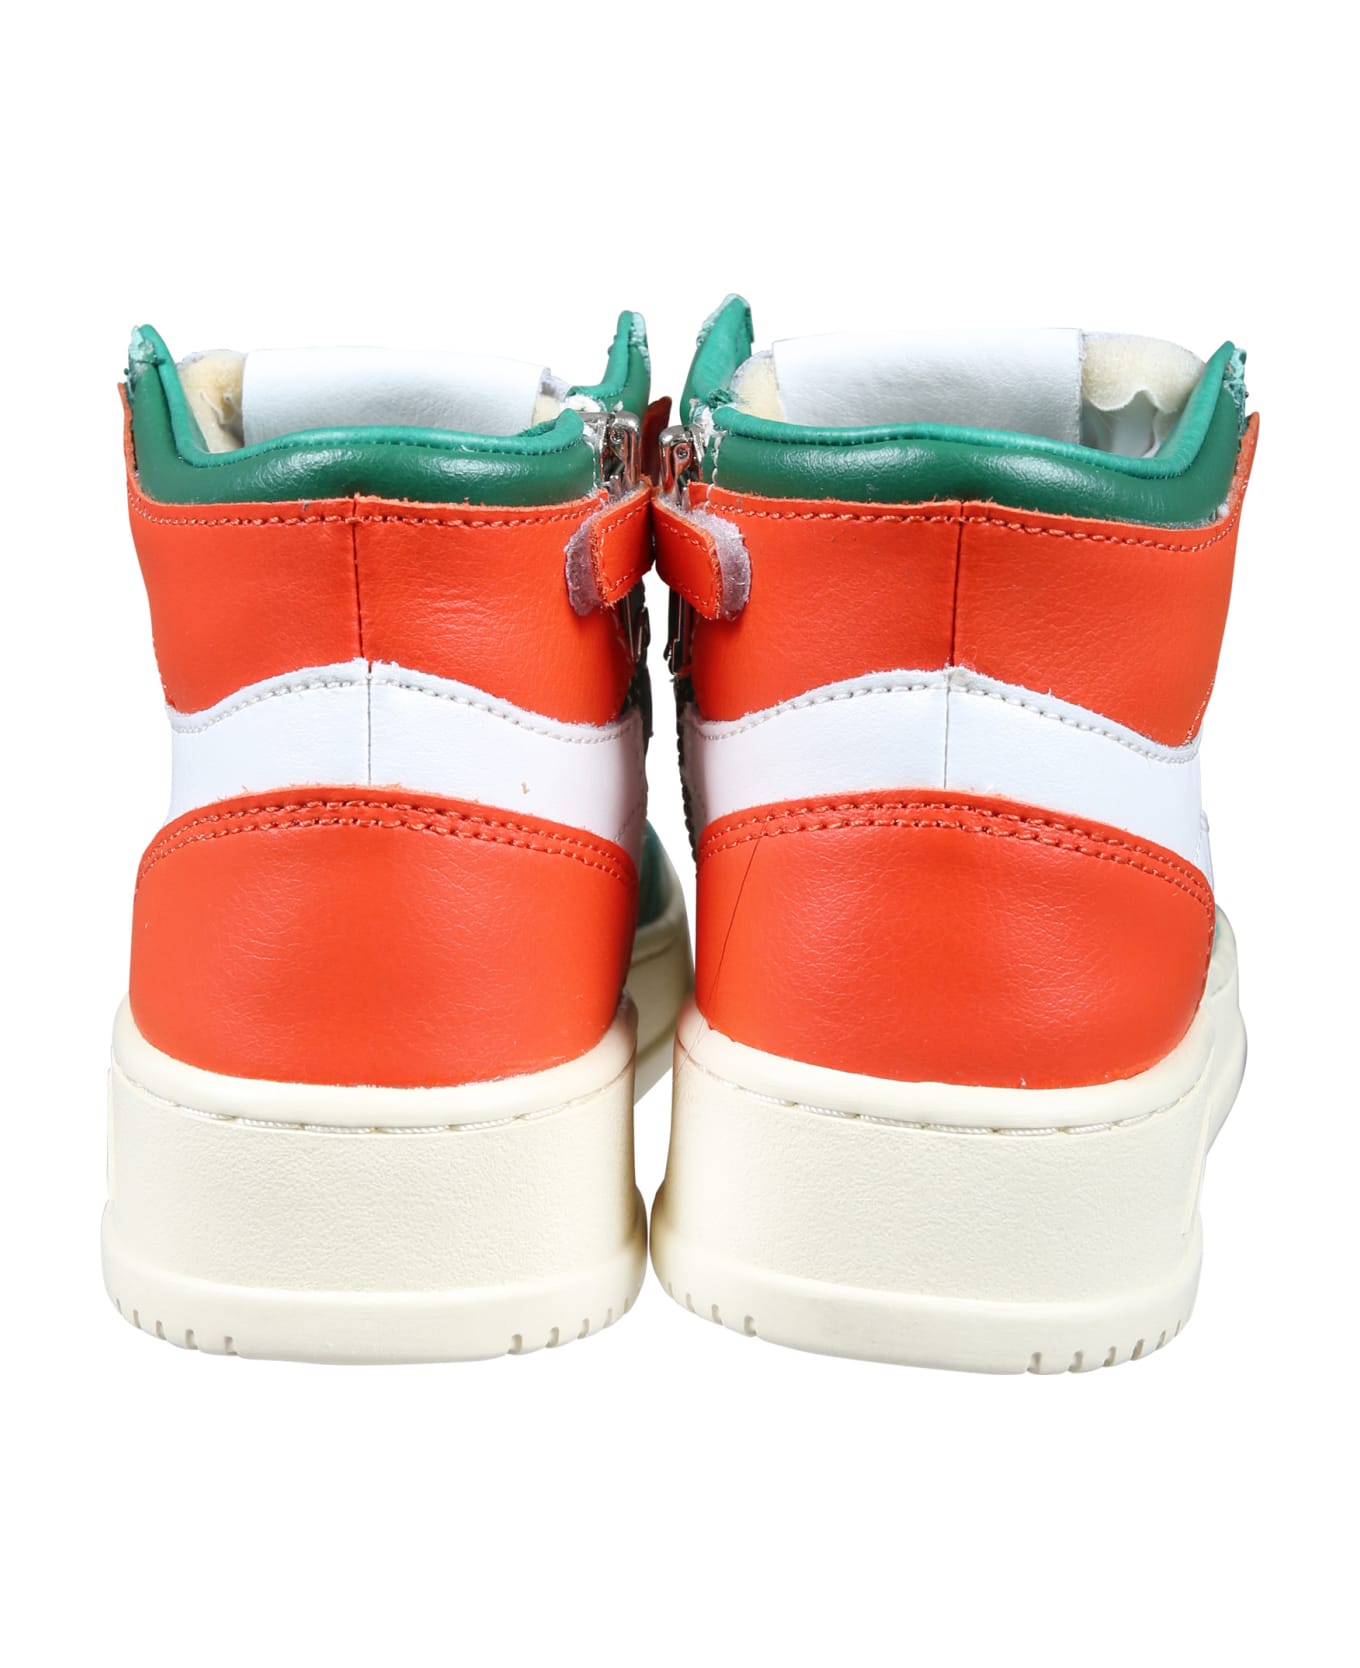 Autry Medalist Mid-top Multicolor Sneakers For Kids - Multicolor シューズ